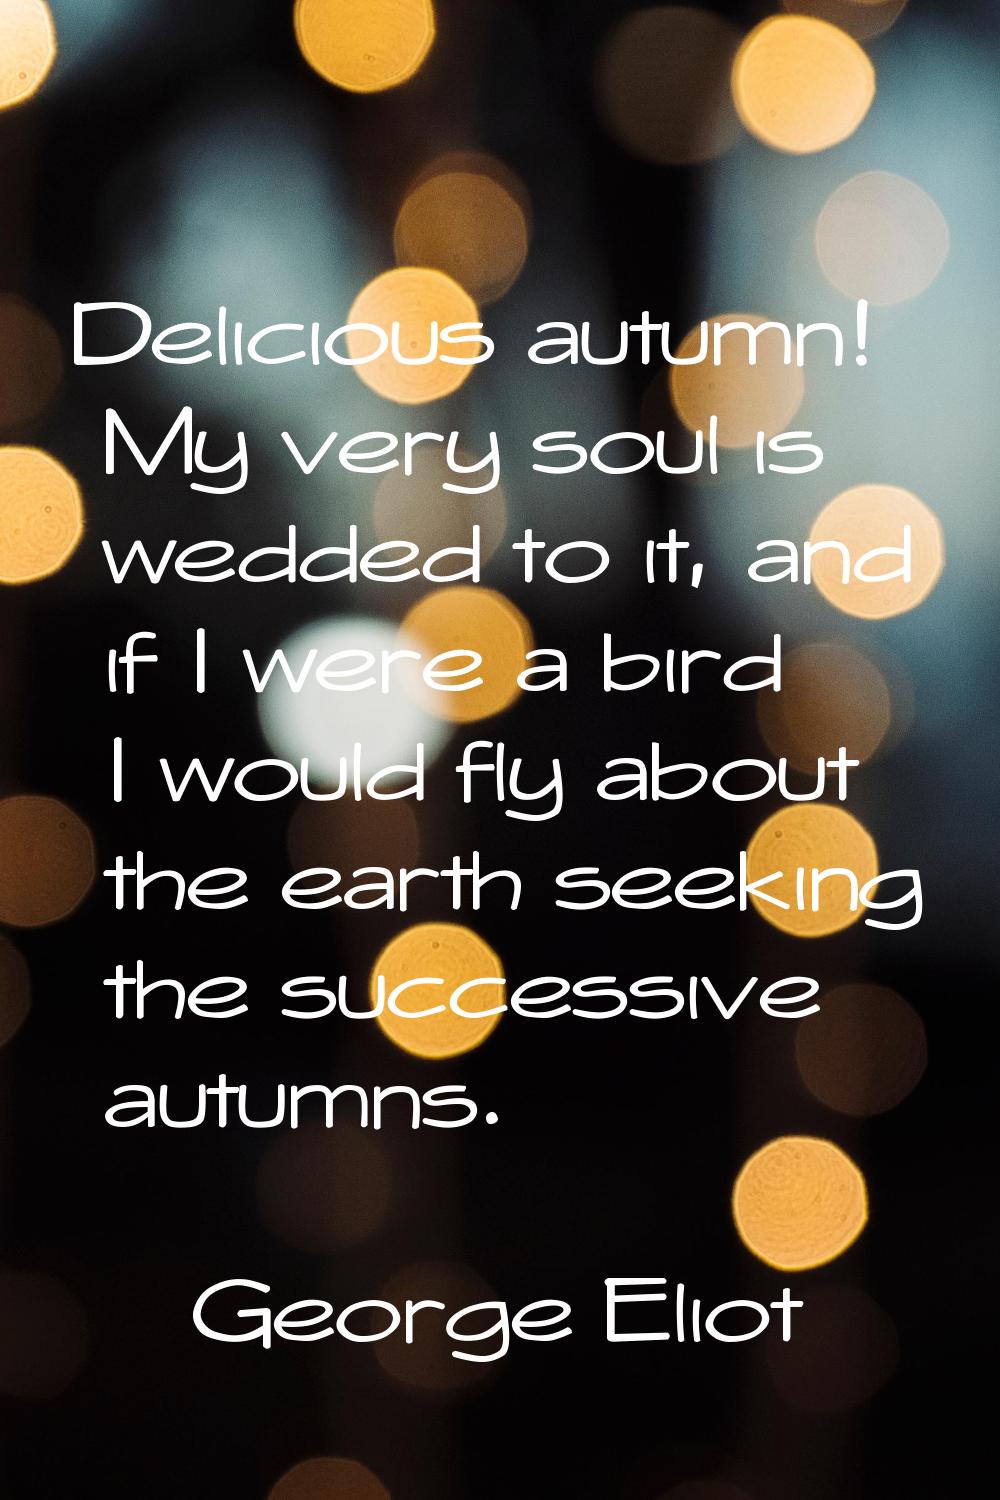 Delicious autumn! My very soul is wedded to it, and if I were a bird I would fly about the earth se